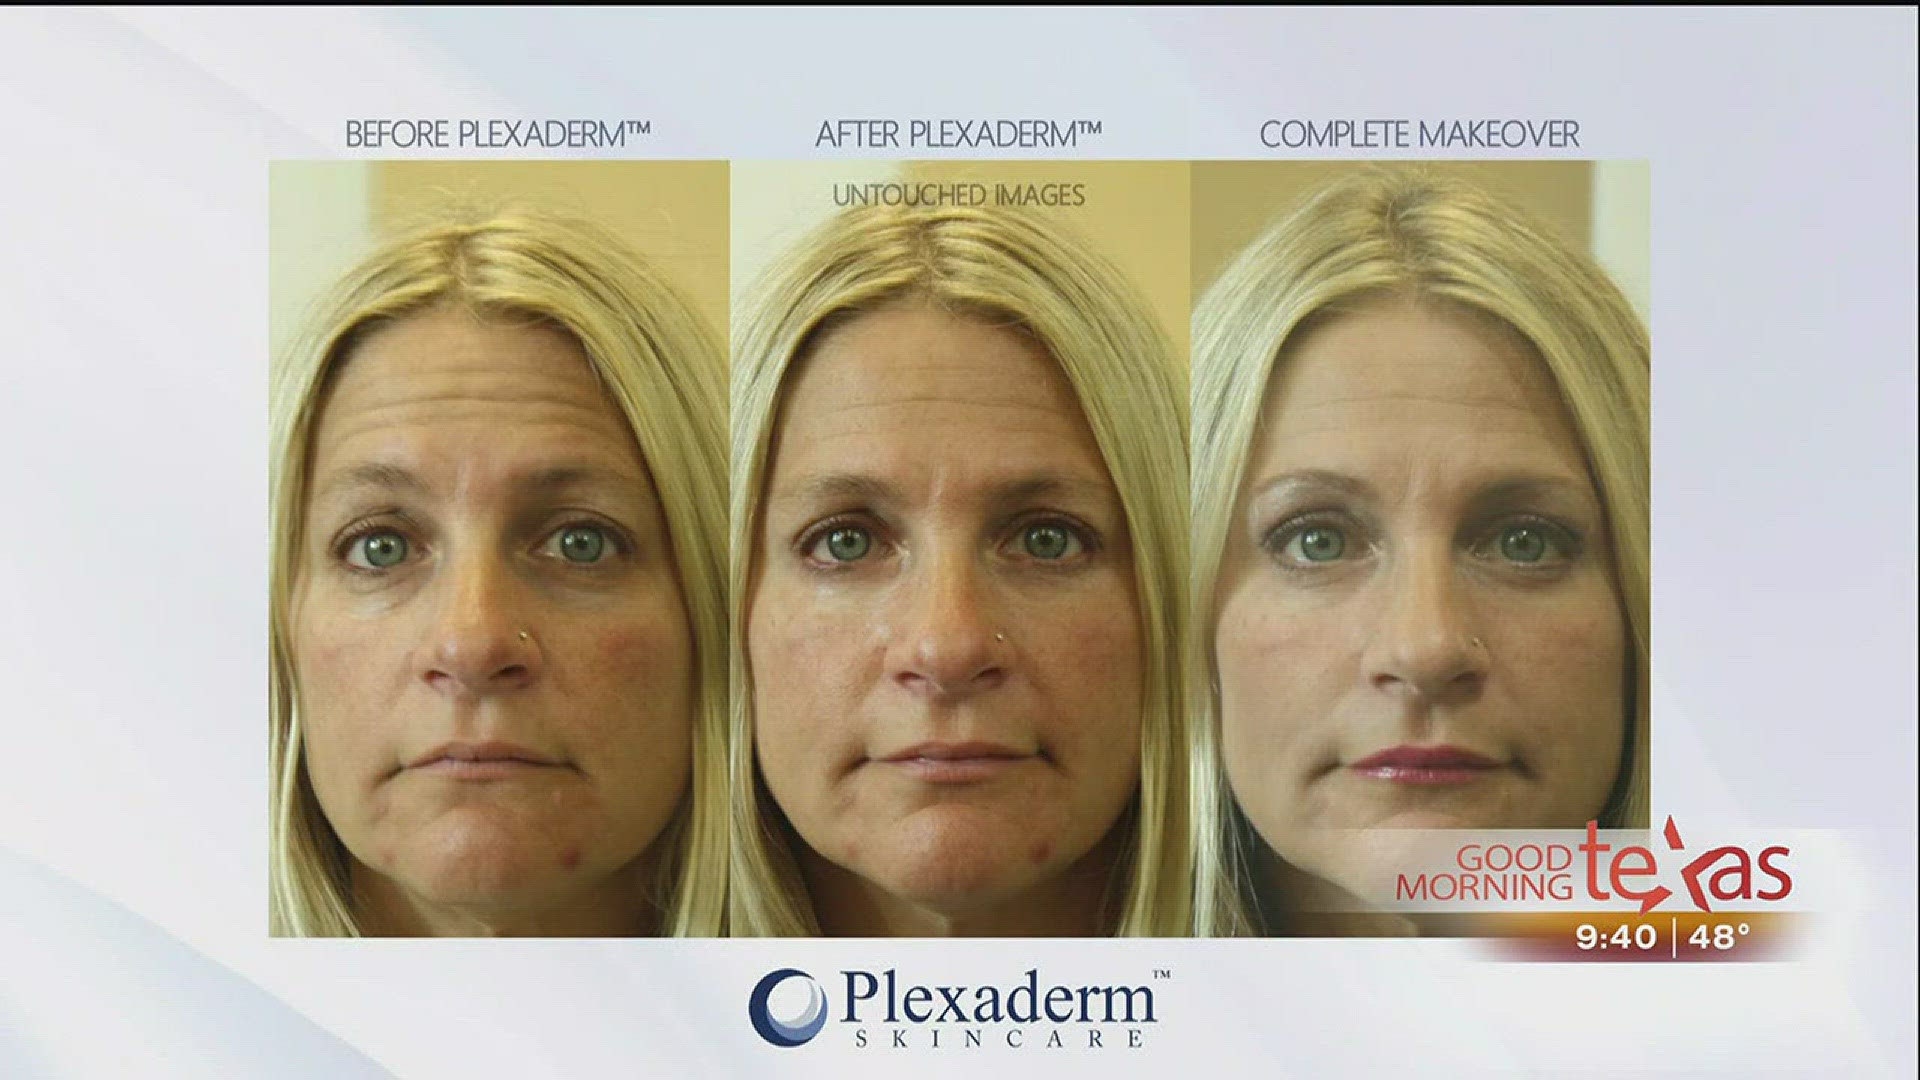 Call (800) 660-4091 for more information or go to www.plexaderm.com.